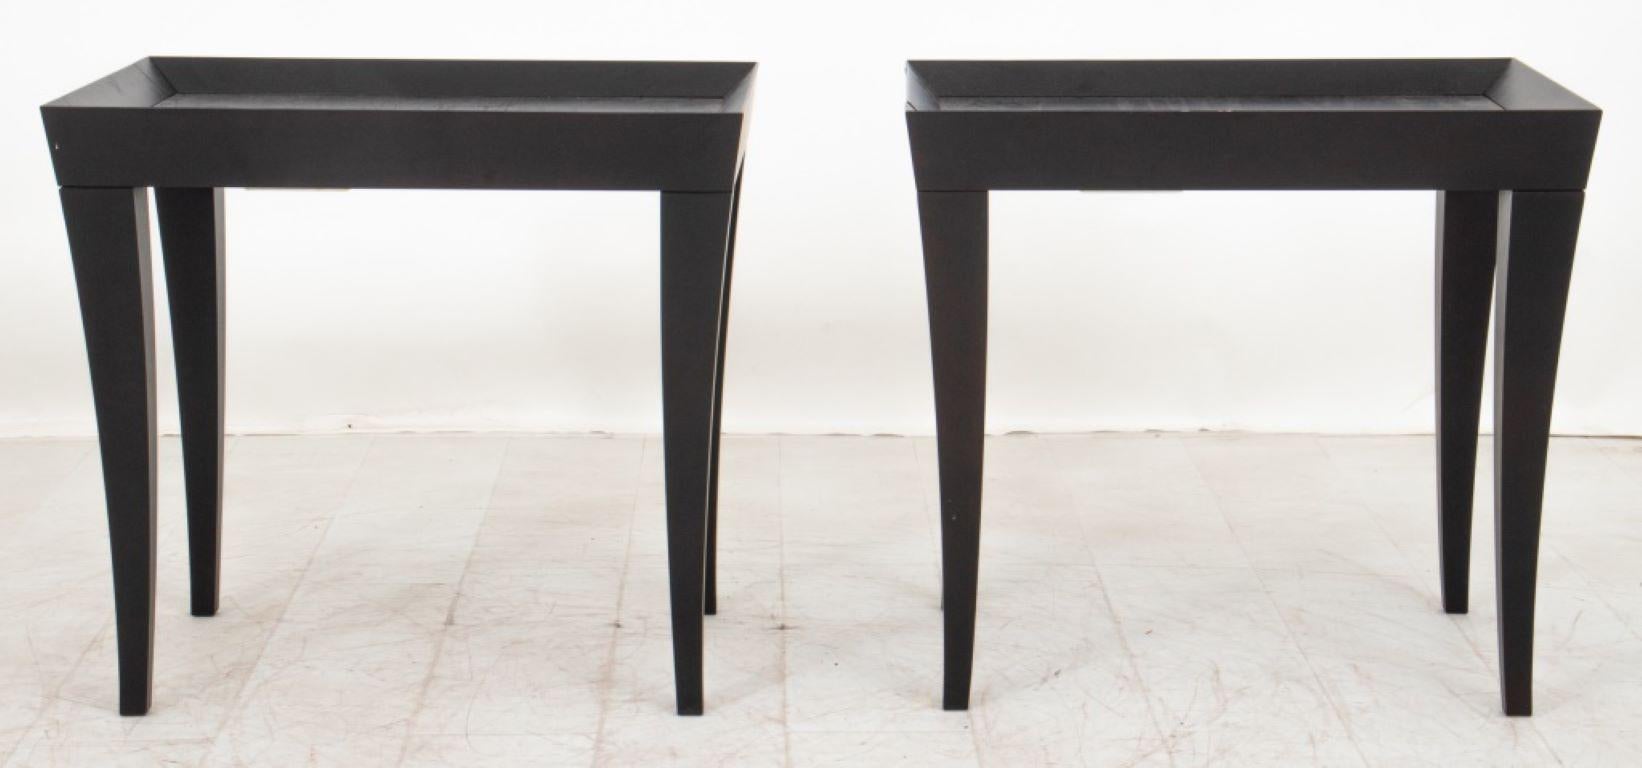 Modern Ebonized Wenge Galleried Lamp Tables, 20th Century. Set of two rectangle small tables in Christian Liaigre Style.

Dealer: S138XX